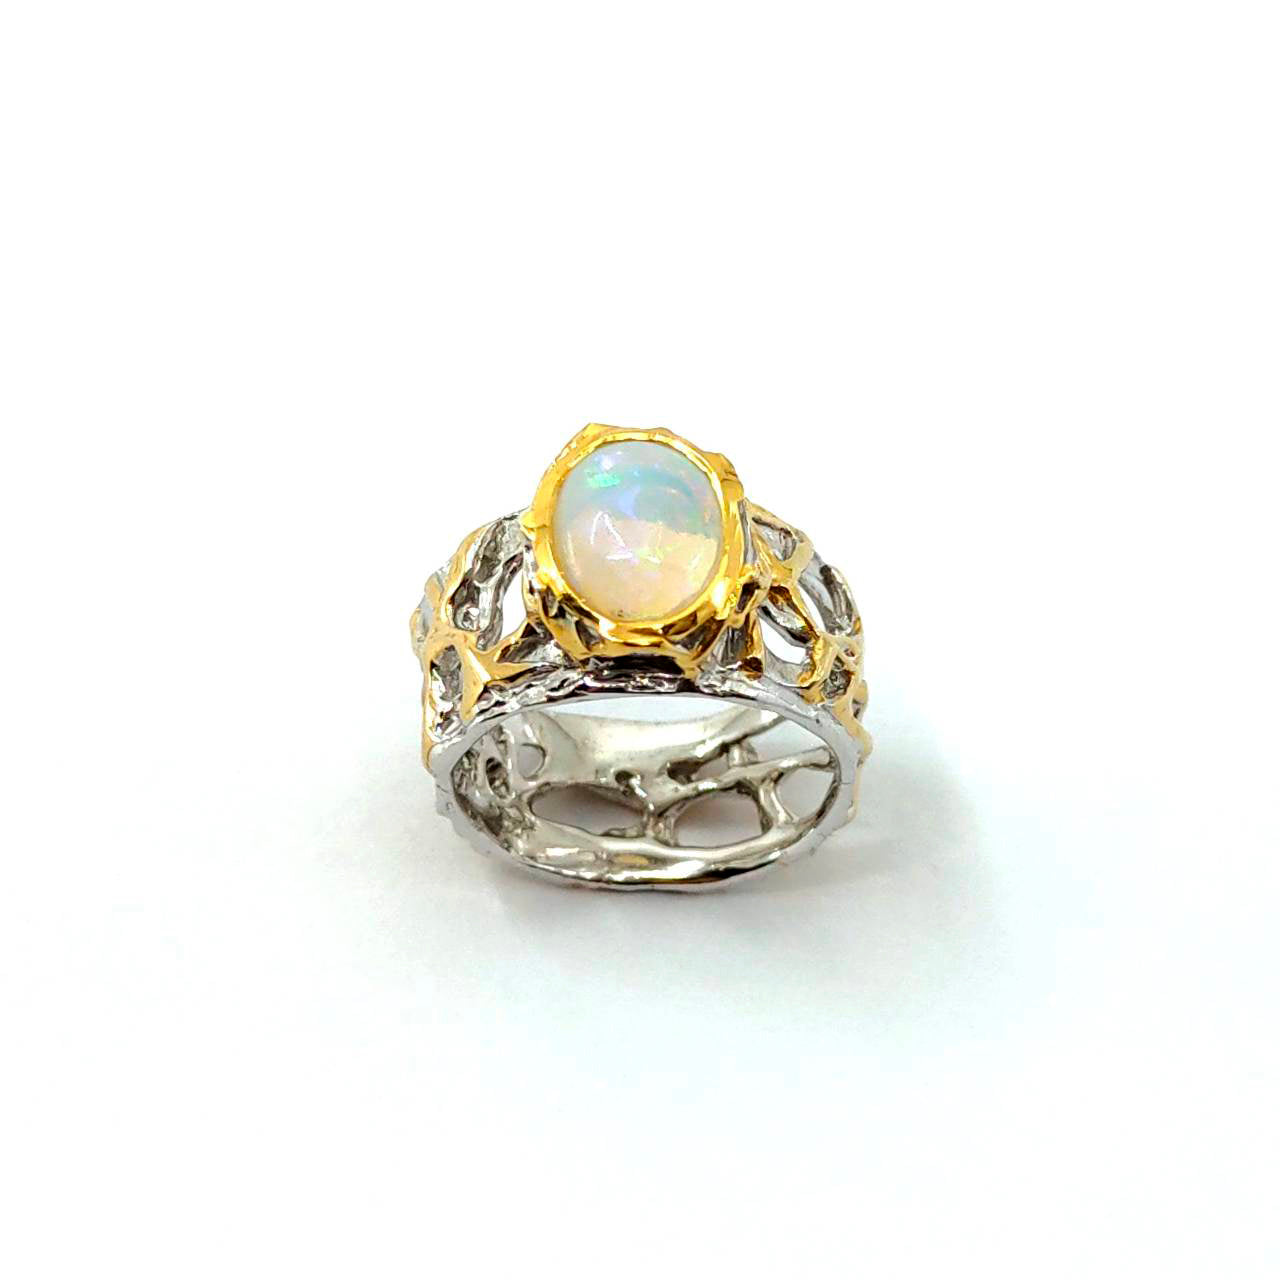 Opal Magic - 925 Sterling Silver Ring, Decorated with Ethiopian Opal, Plated with 3 Micron 22K Yellow Gold and White Rhodium